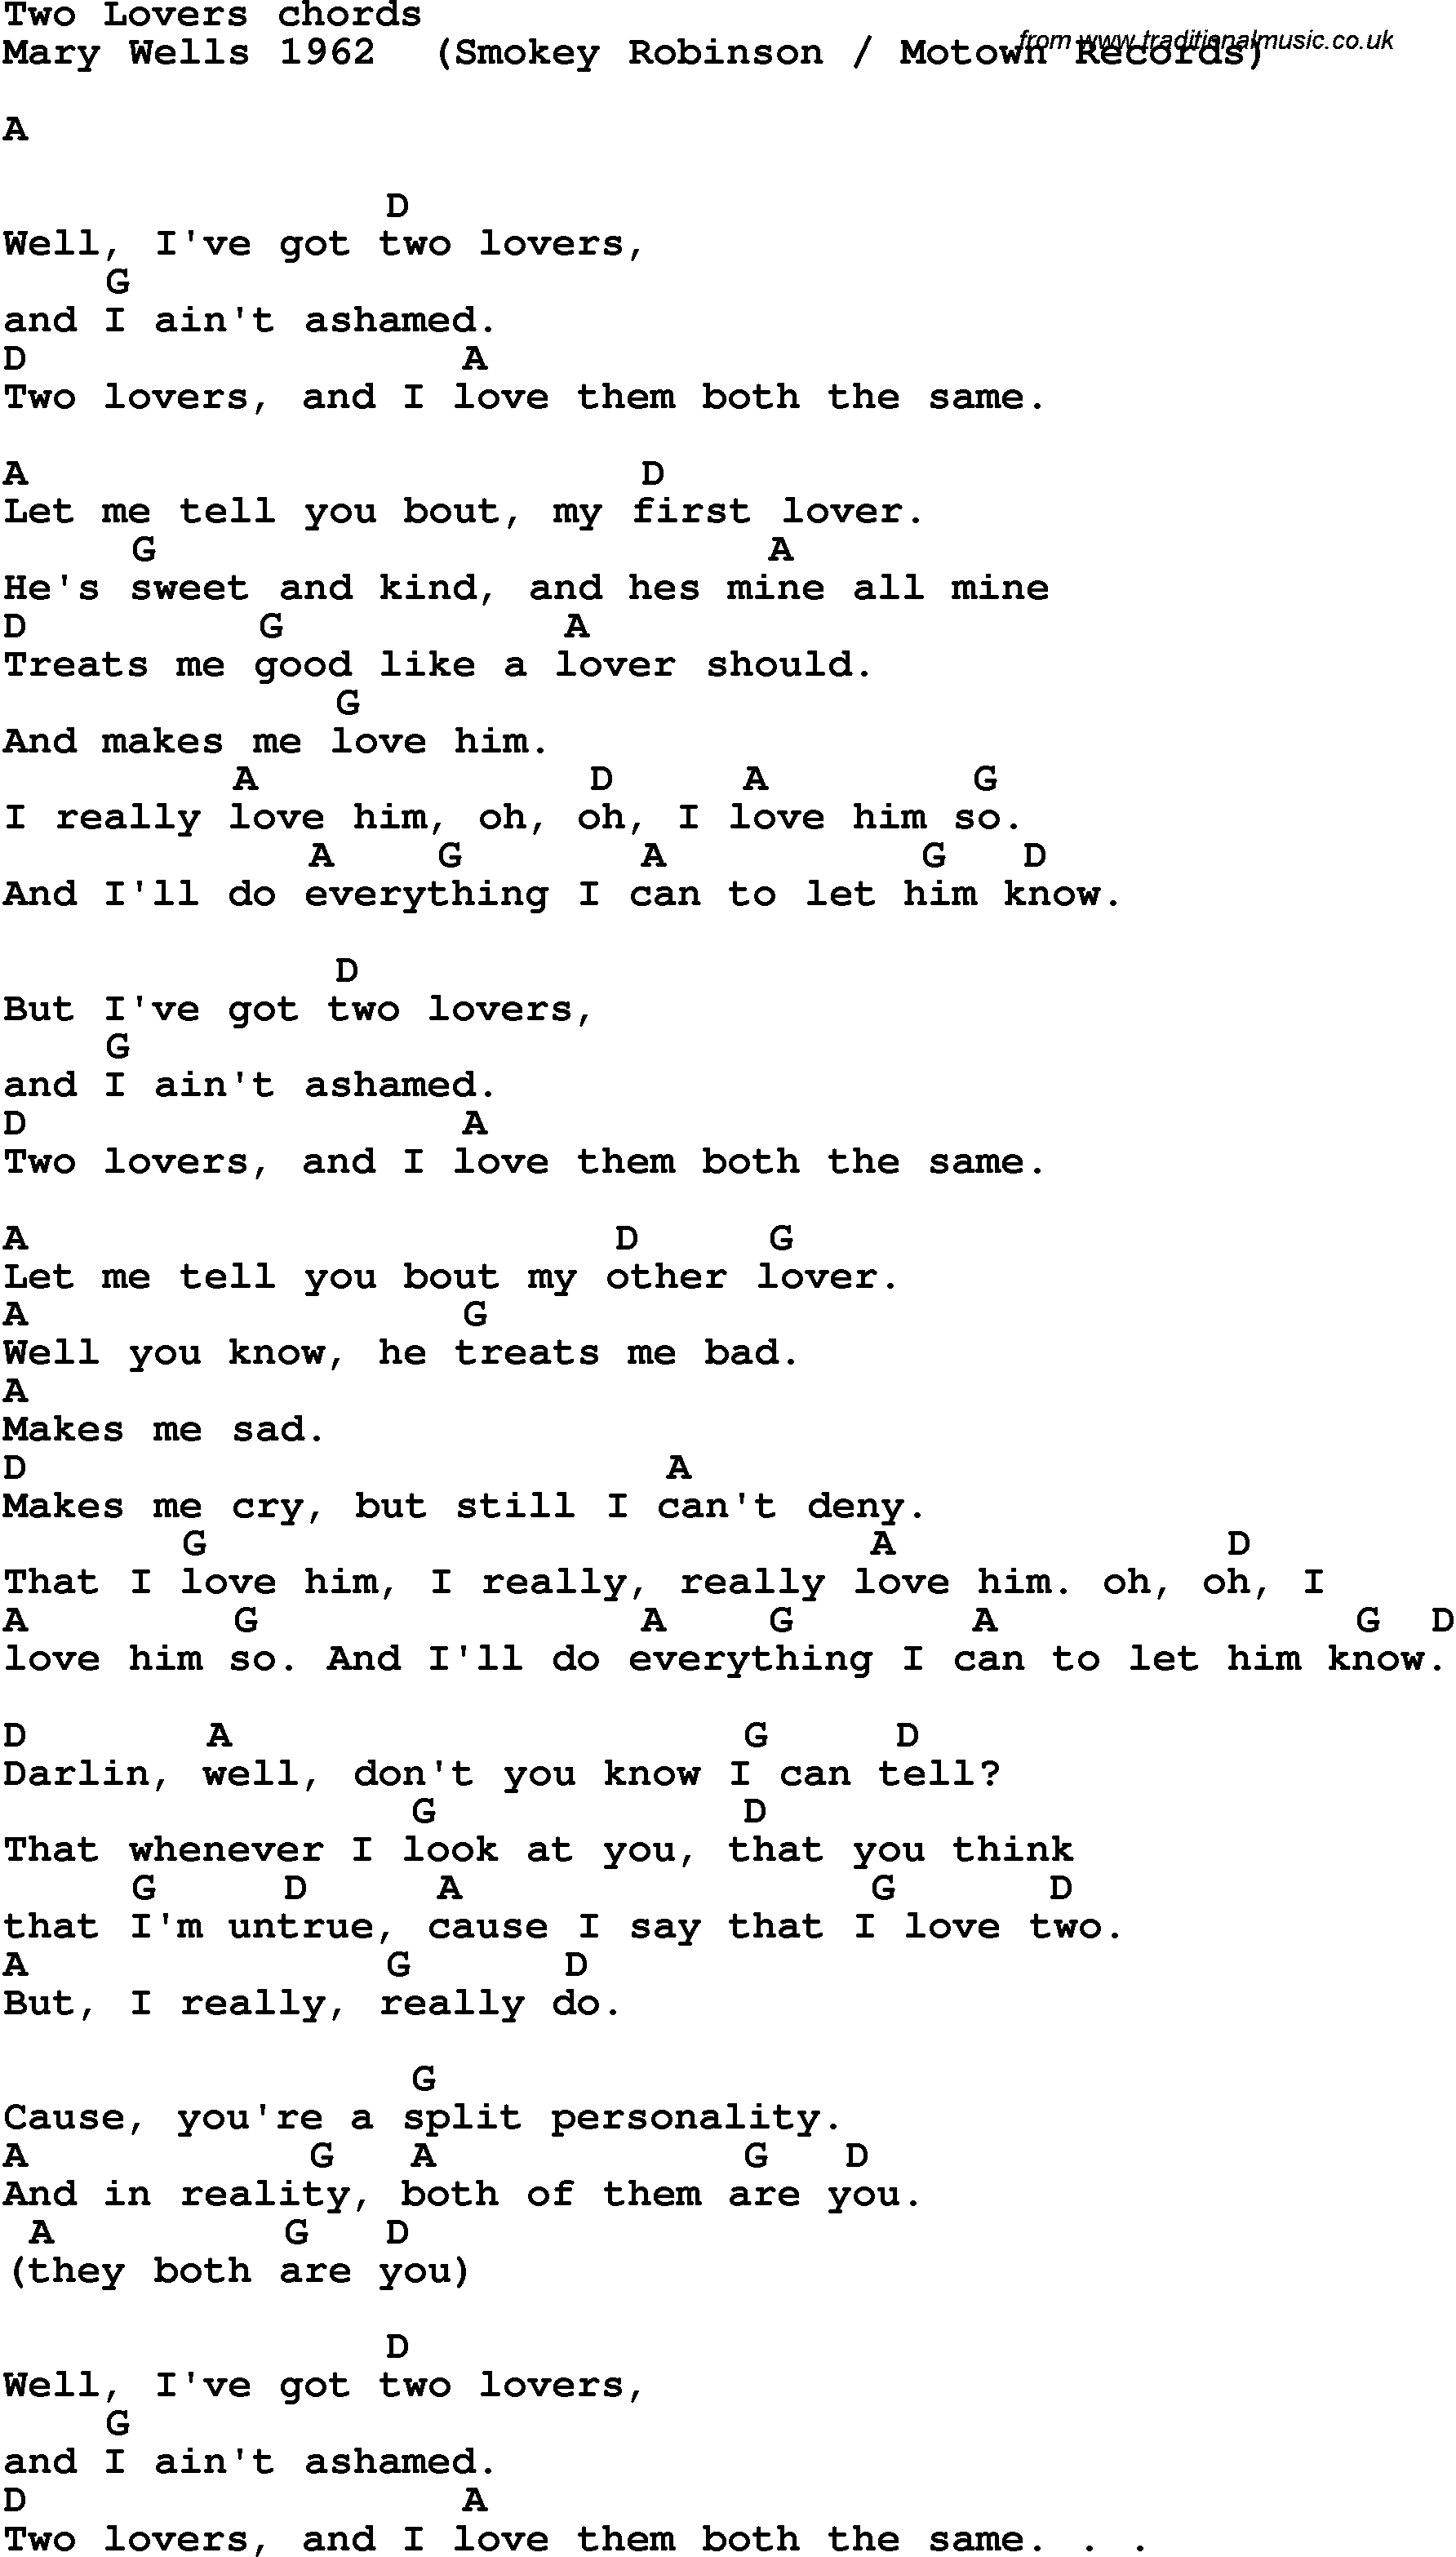 Song Lyrics with guitar chords for Two Lovers